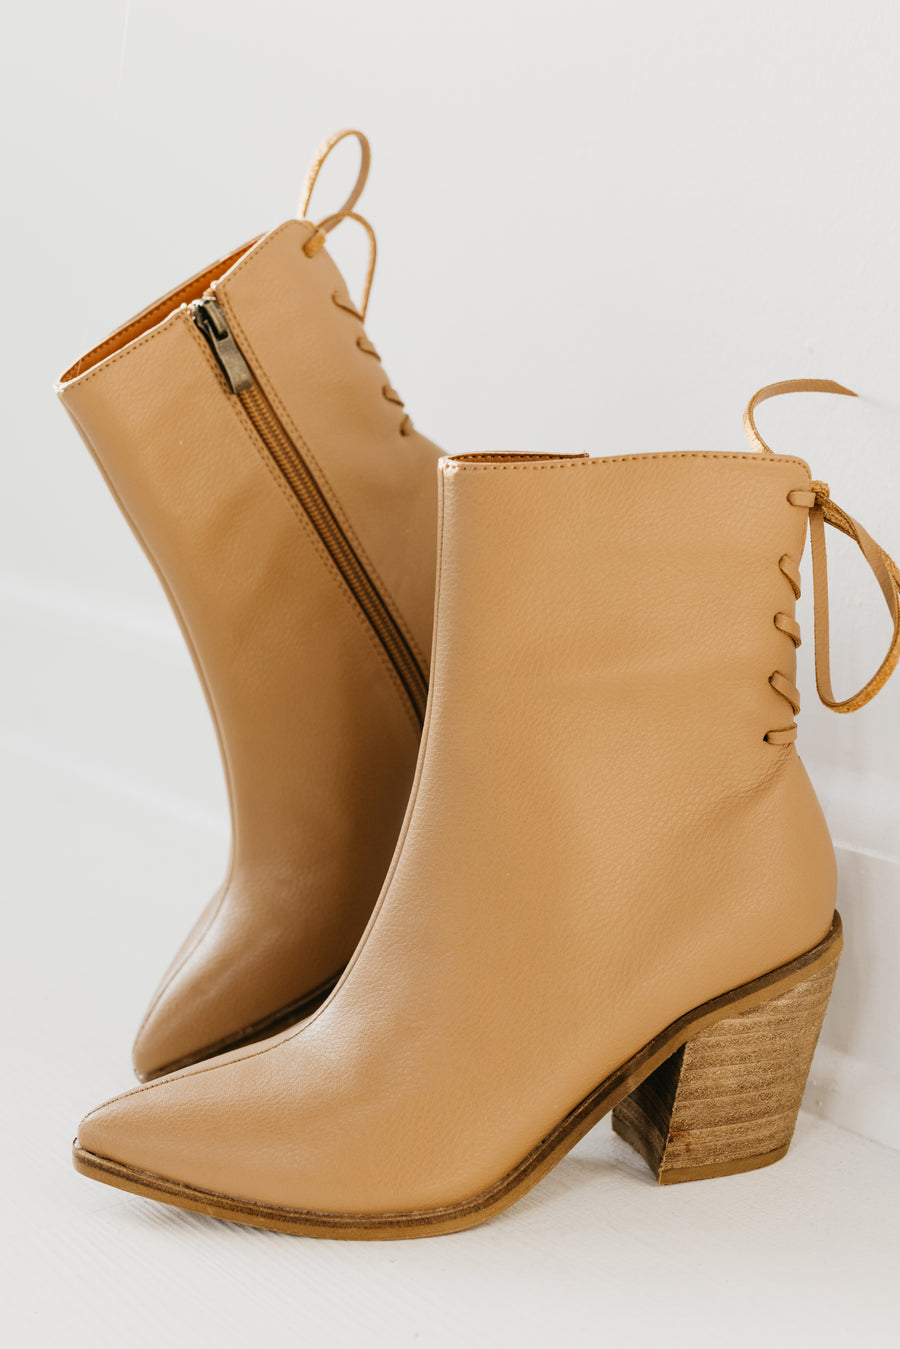 The Aster Lace Up Bootie  - FINAL SALE